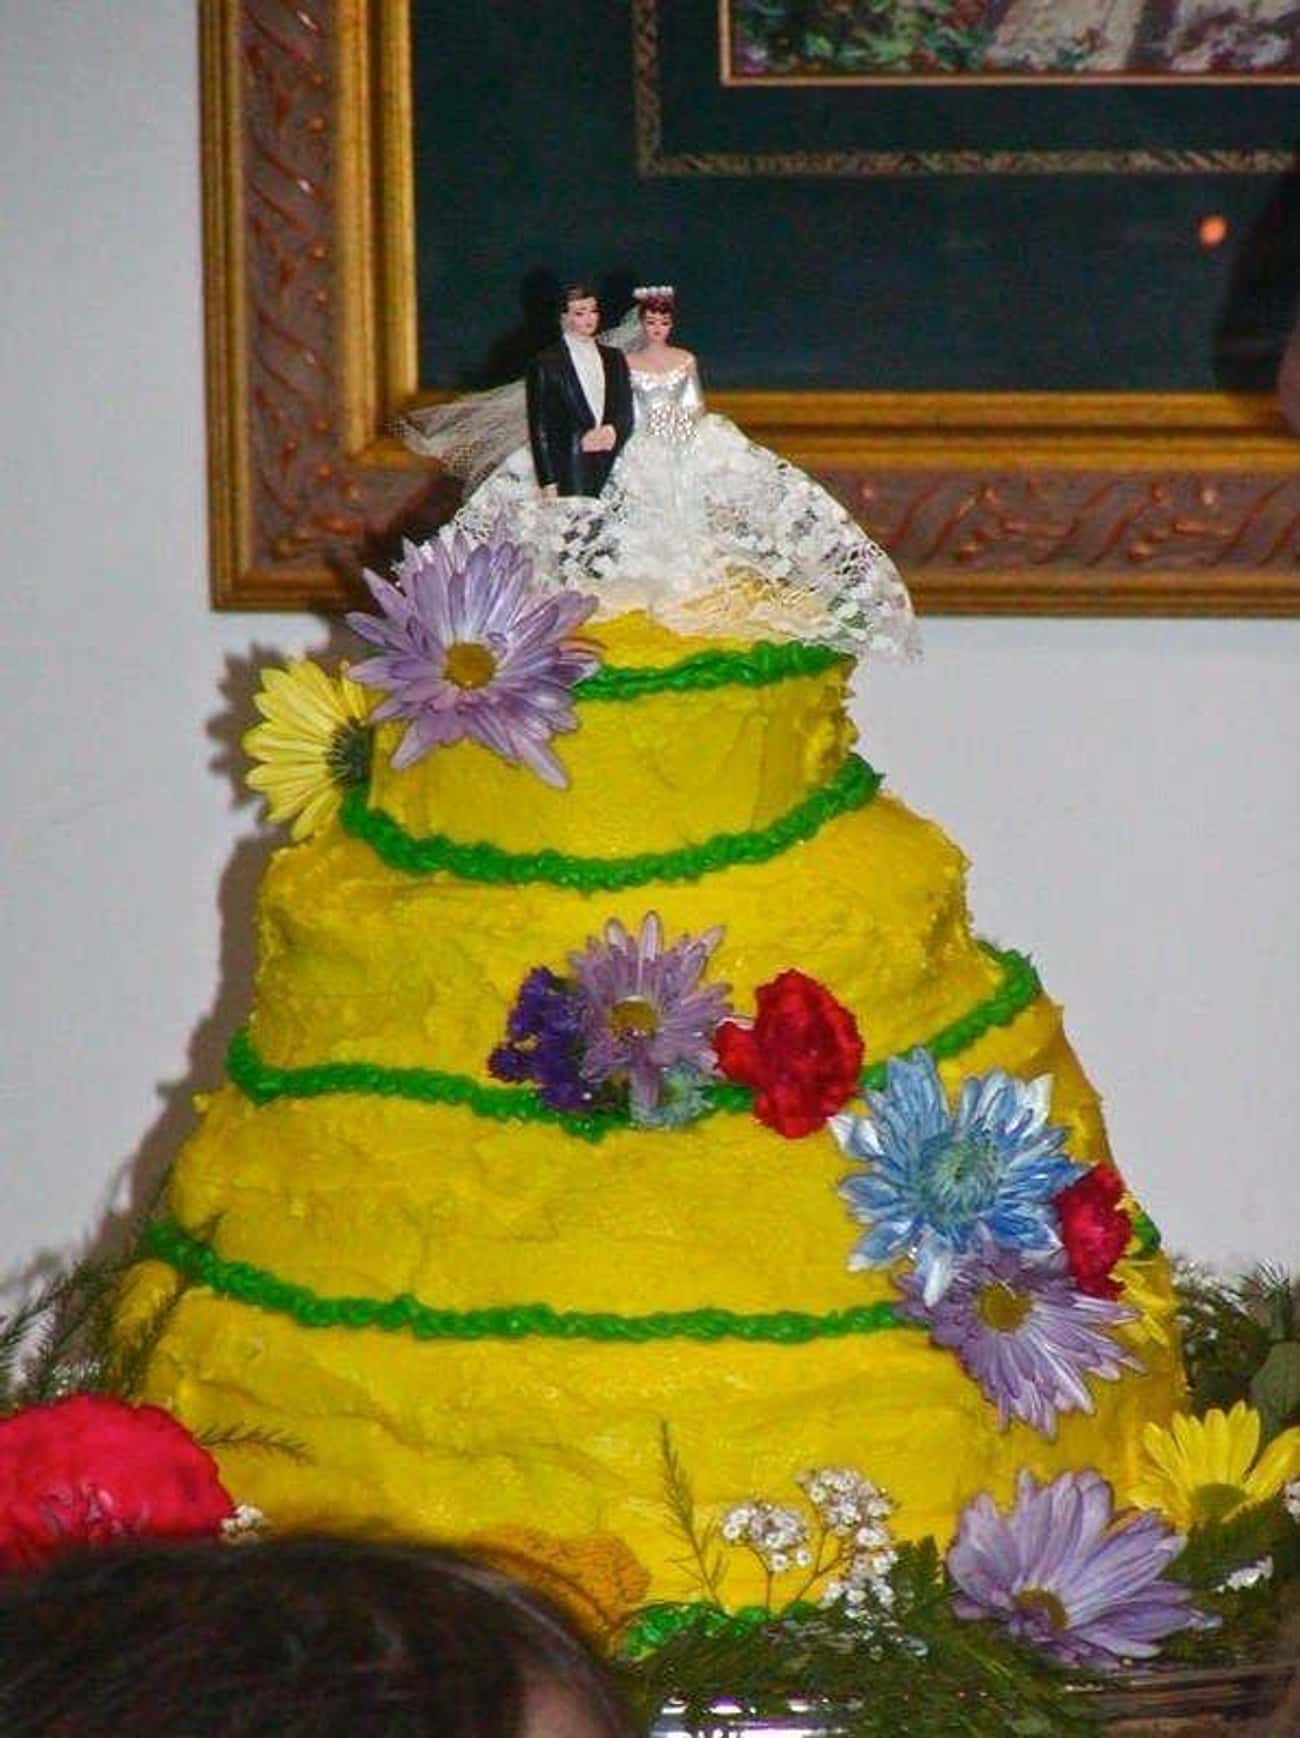 This redneck wedding cake is definitely unique and not what you would expect at a wedding.